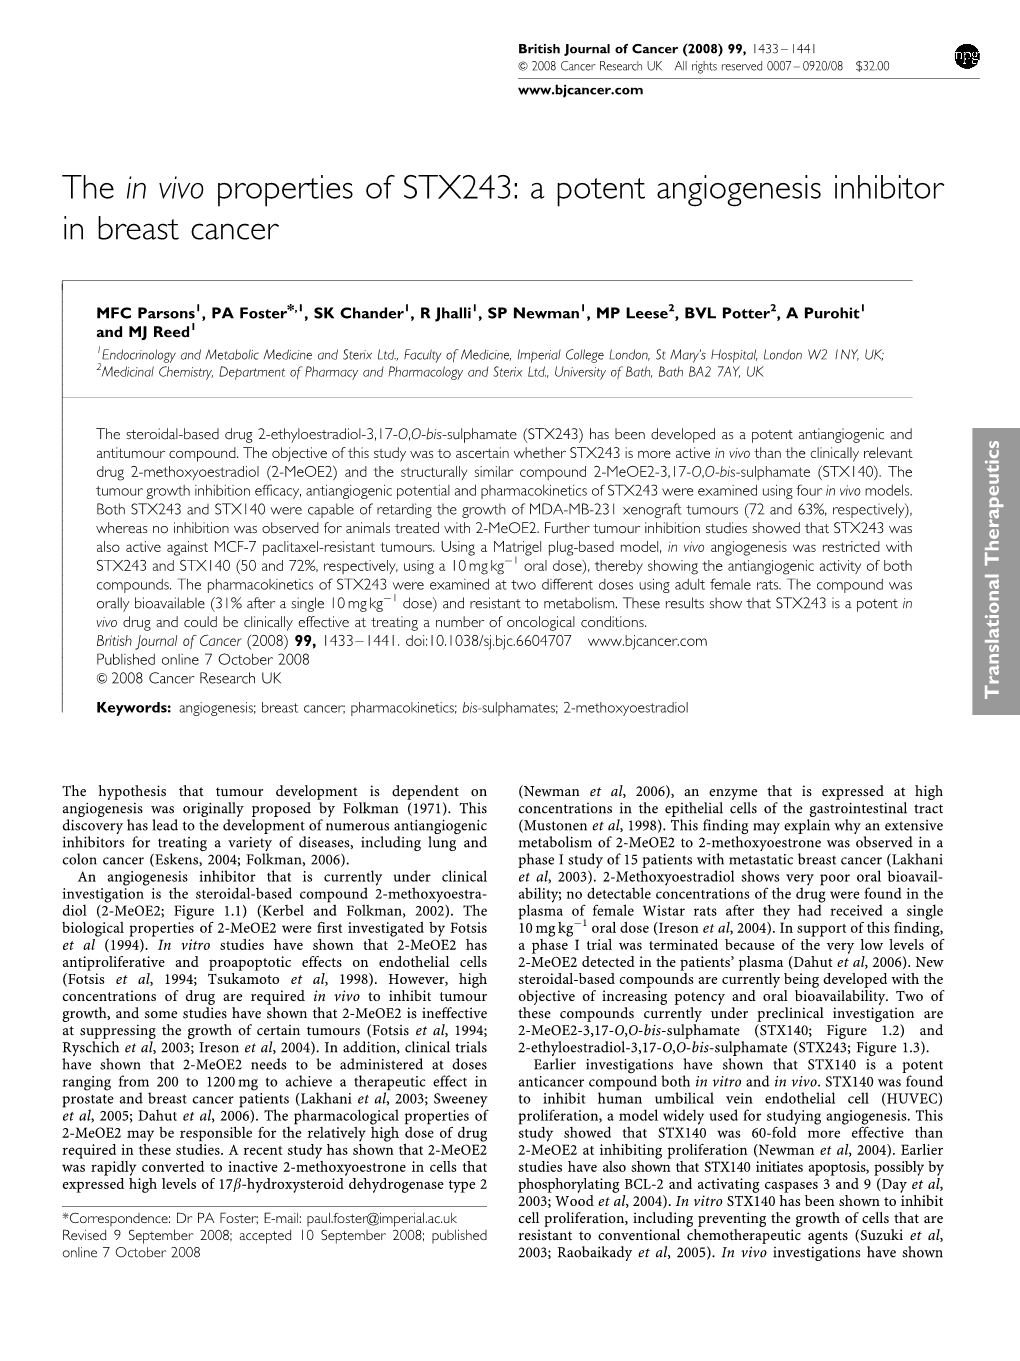 The in Vivo Properties of STX243: a Potent Angiogenesis Inhibitor in Breast Cancer